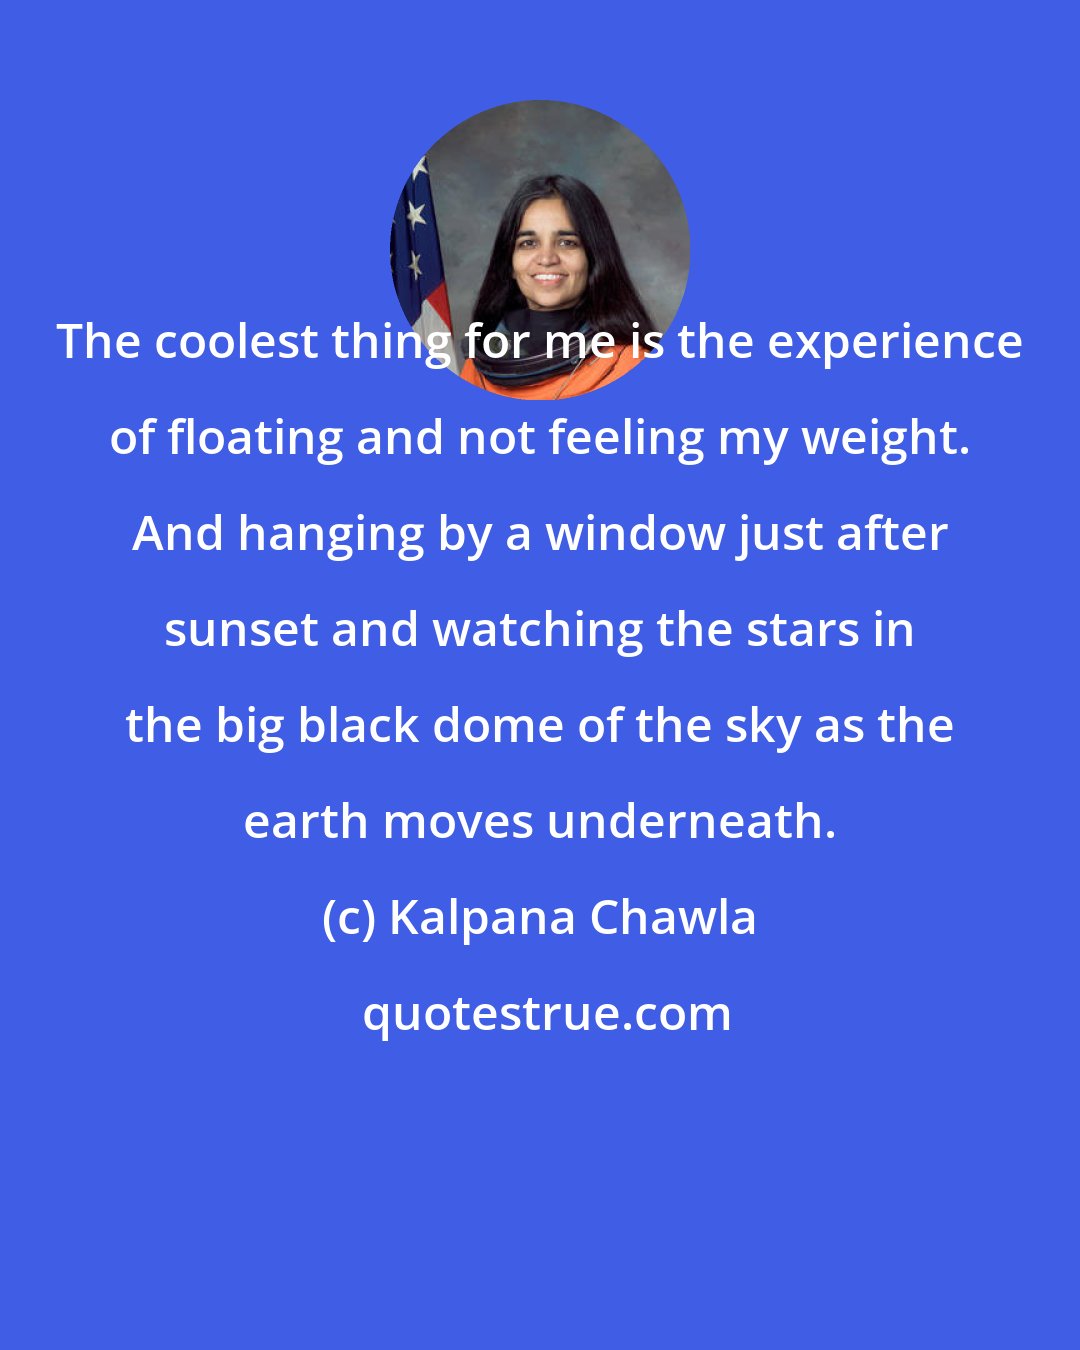 Kalpana Chawla: The coolest thing for me is the experience of floating and not feeling my weight. And hanging by a window just after sunset and watching the stars in the big black dome of the sky as the earth moves underneath.